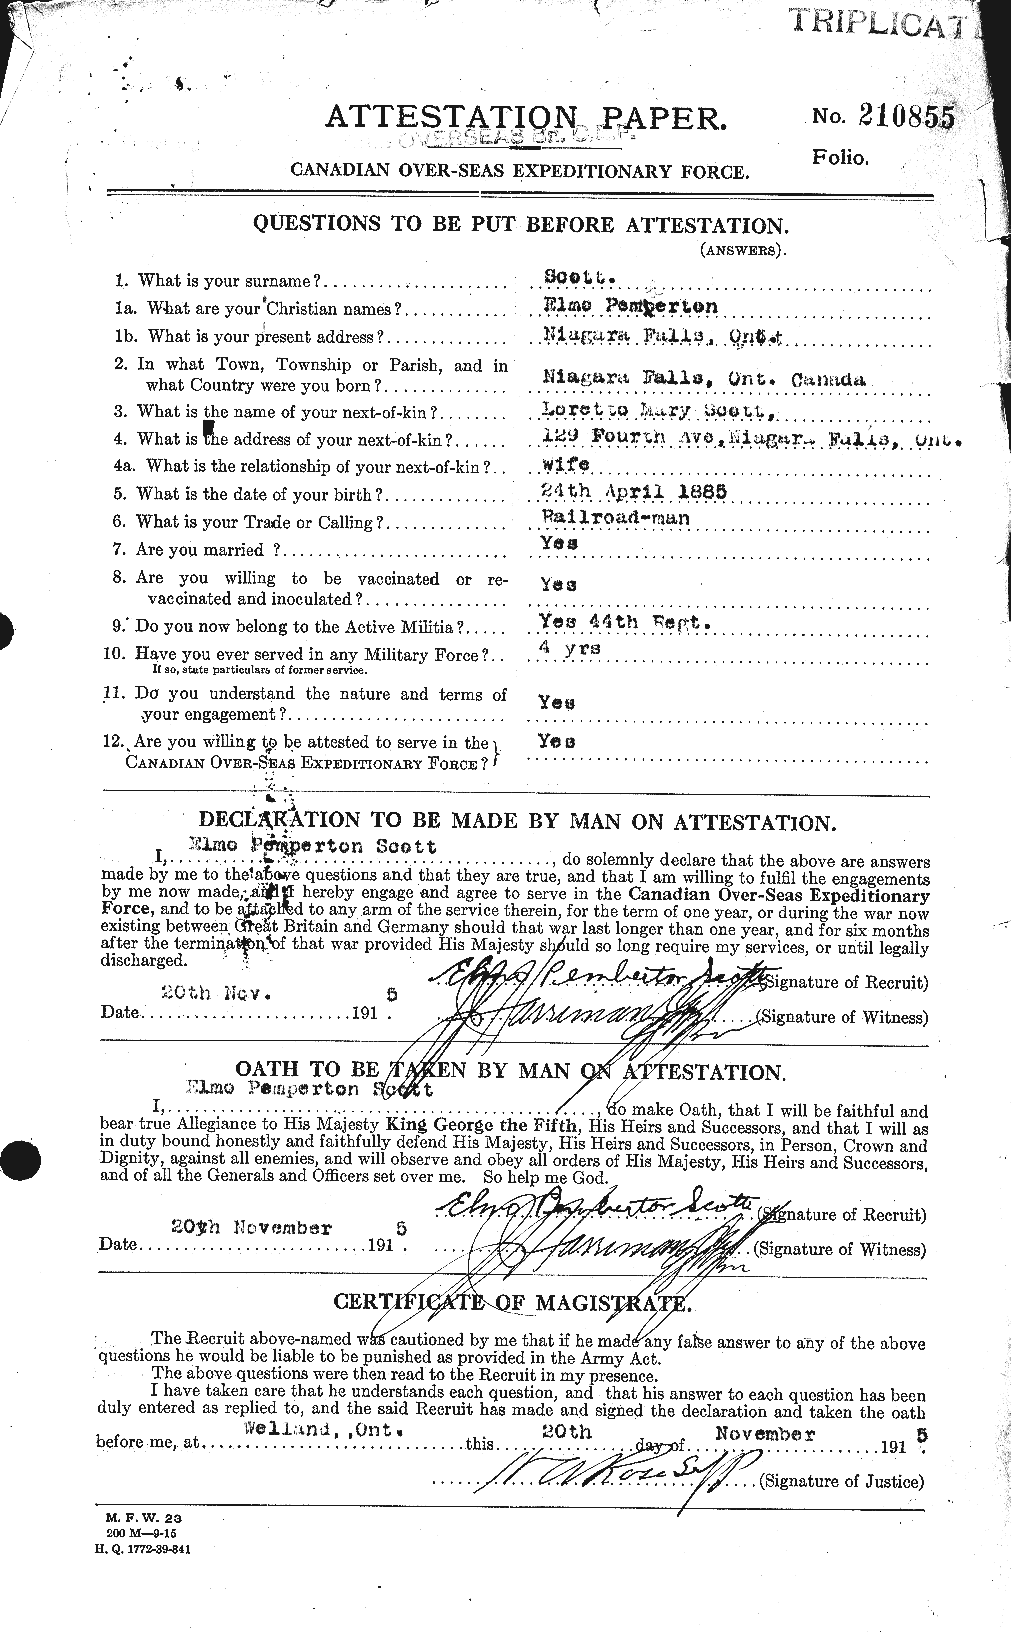 Personnel Records of the First World War - CEF 085033a